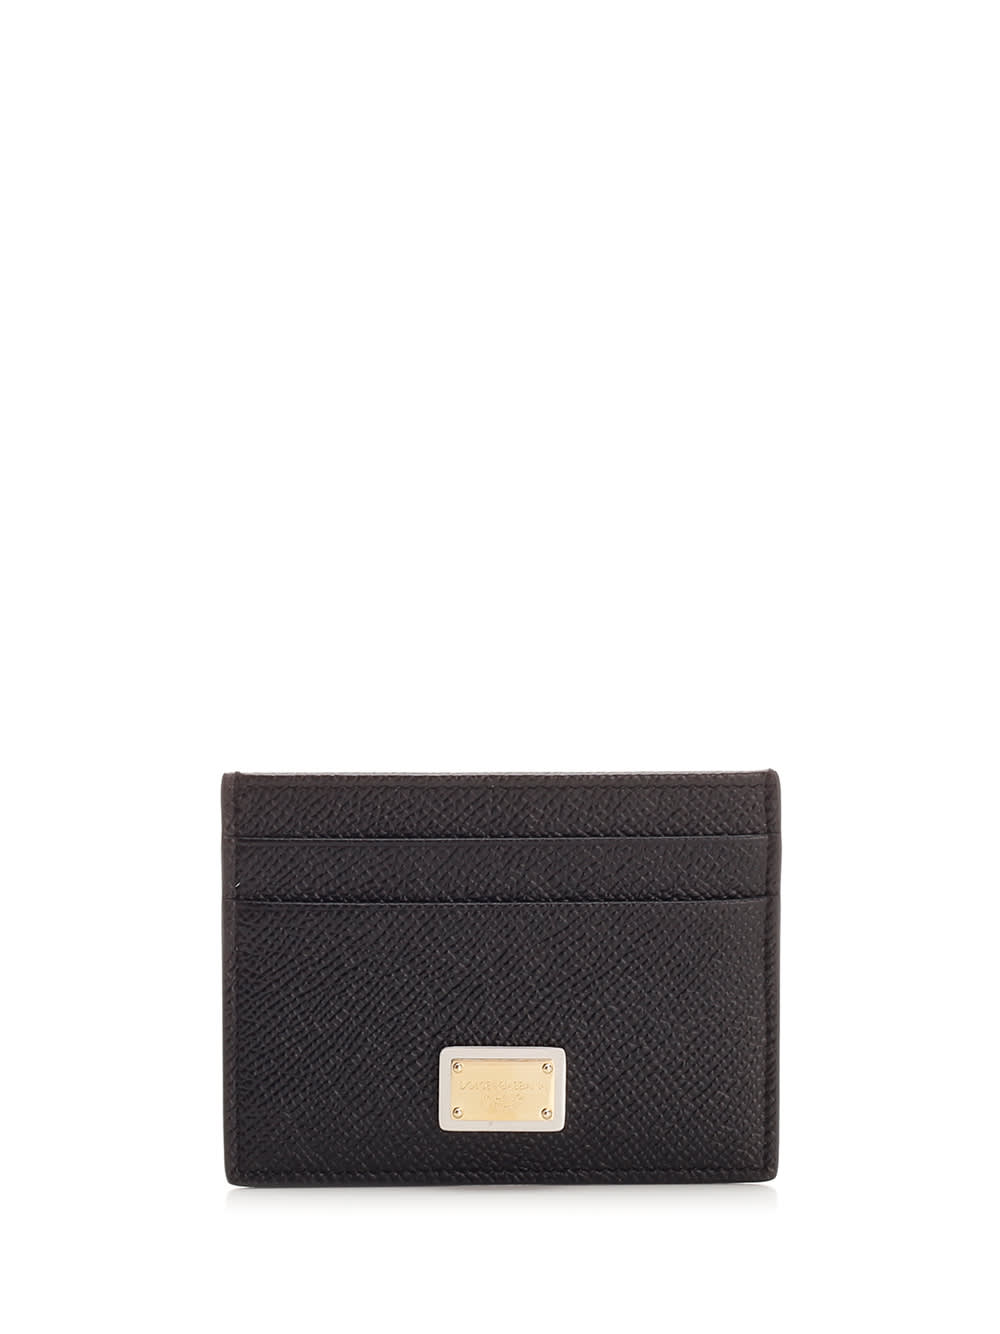 Dolce & Gabbana Card Holder With Tag In Black